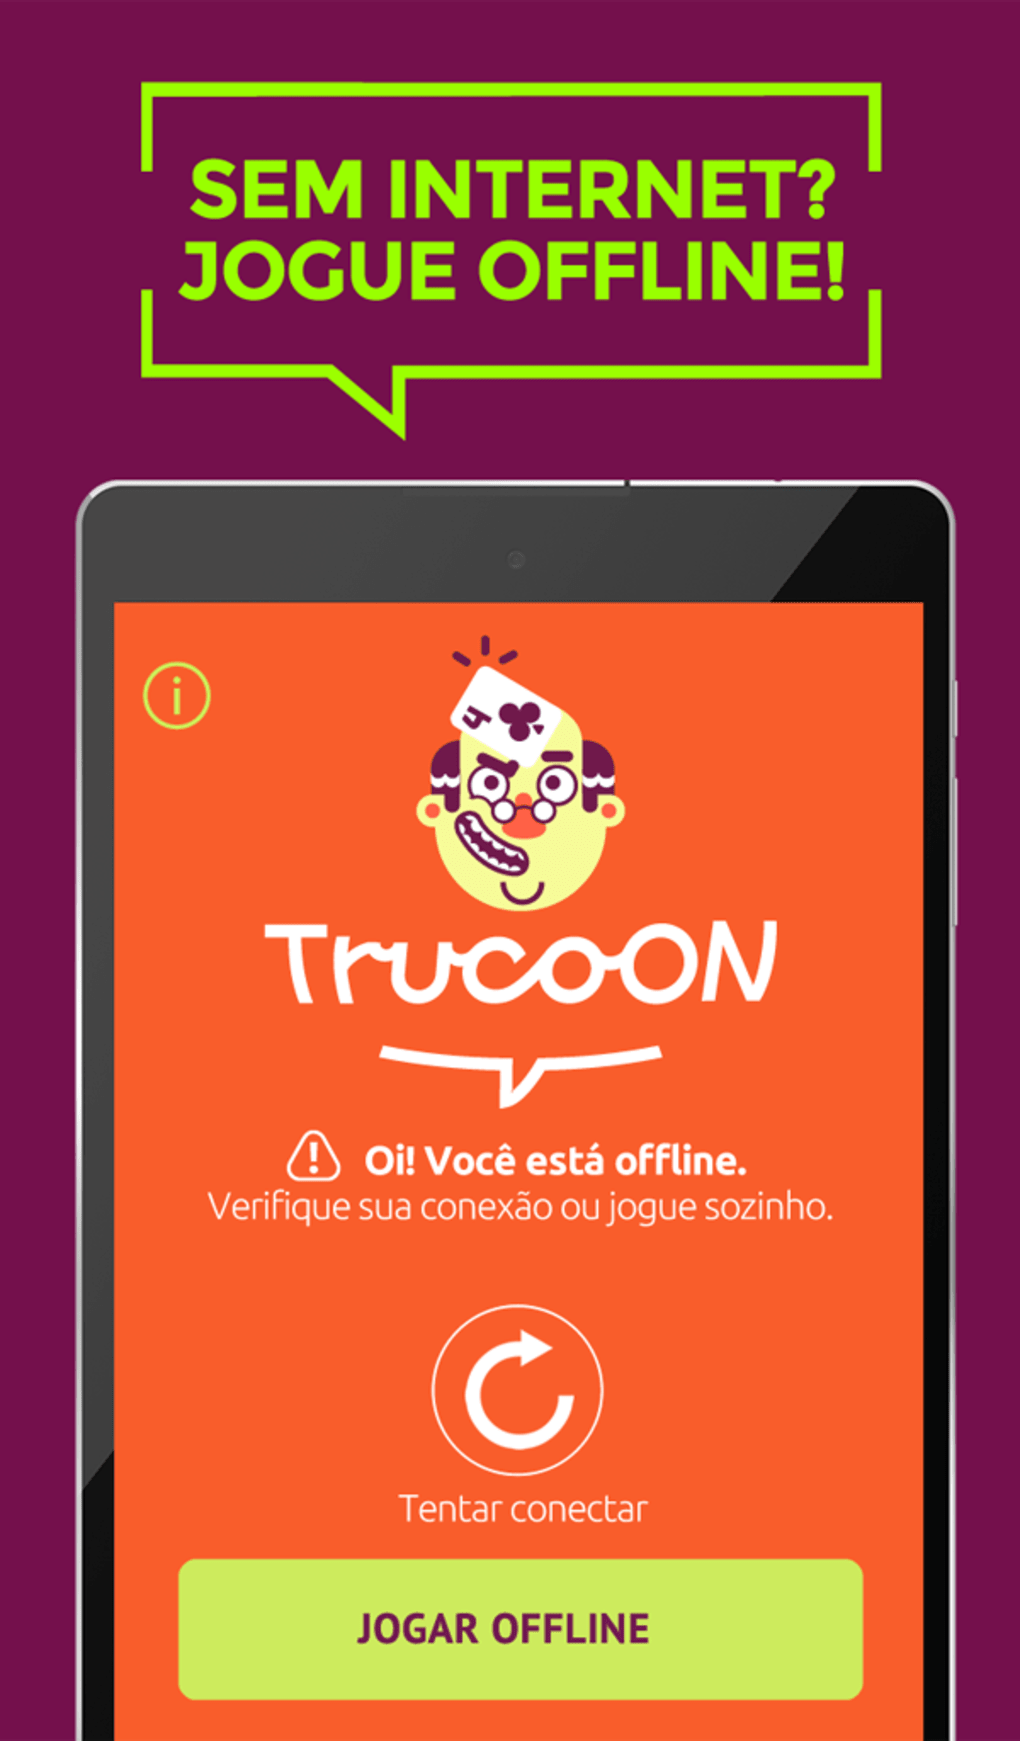 TrucoON - Truco Online for Android - Free App Download